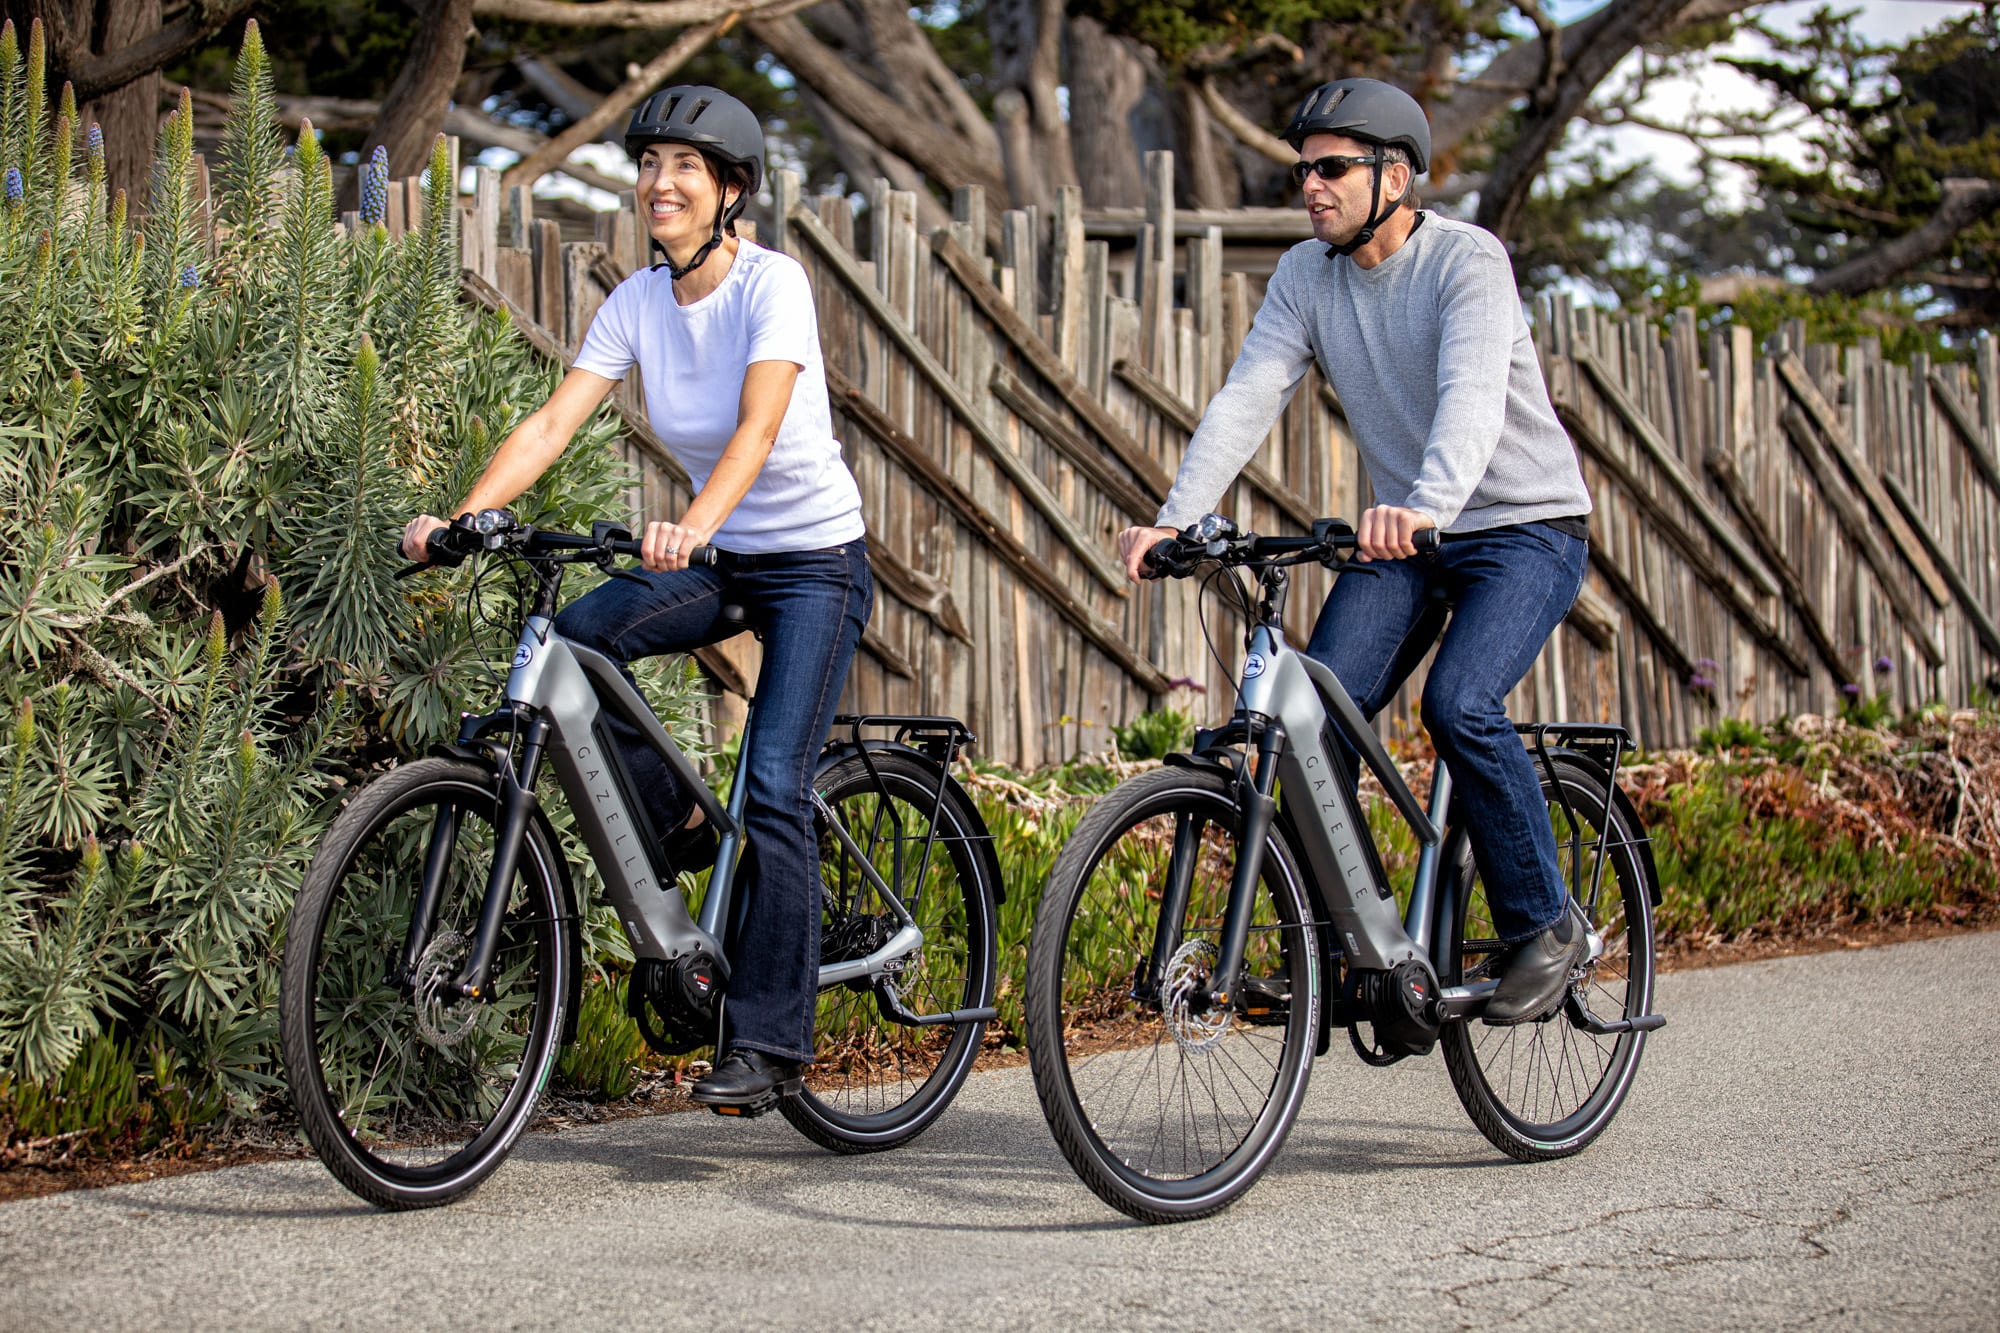 Gazelle Ultimate C380+ e-bikes are sold at Bixby Bicycles, Oklahoma